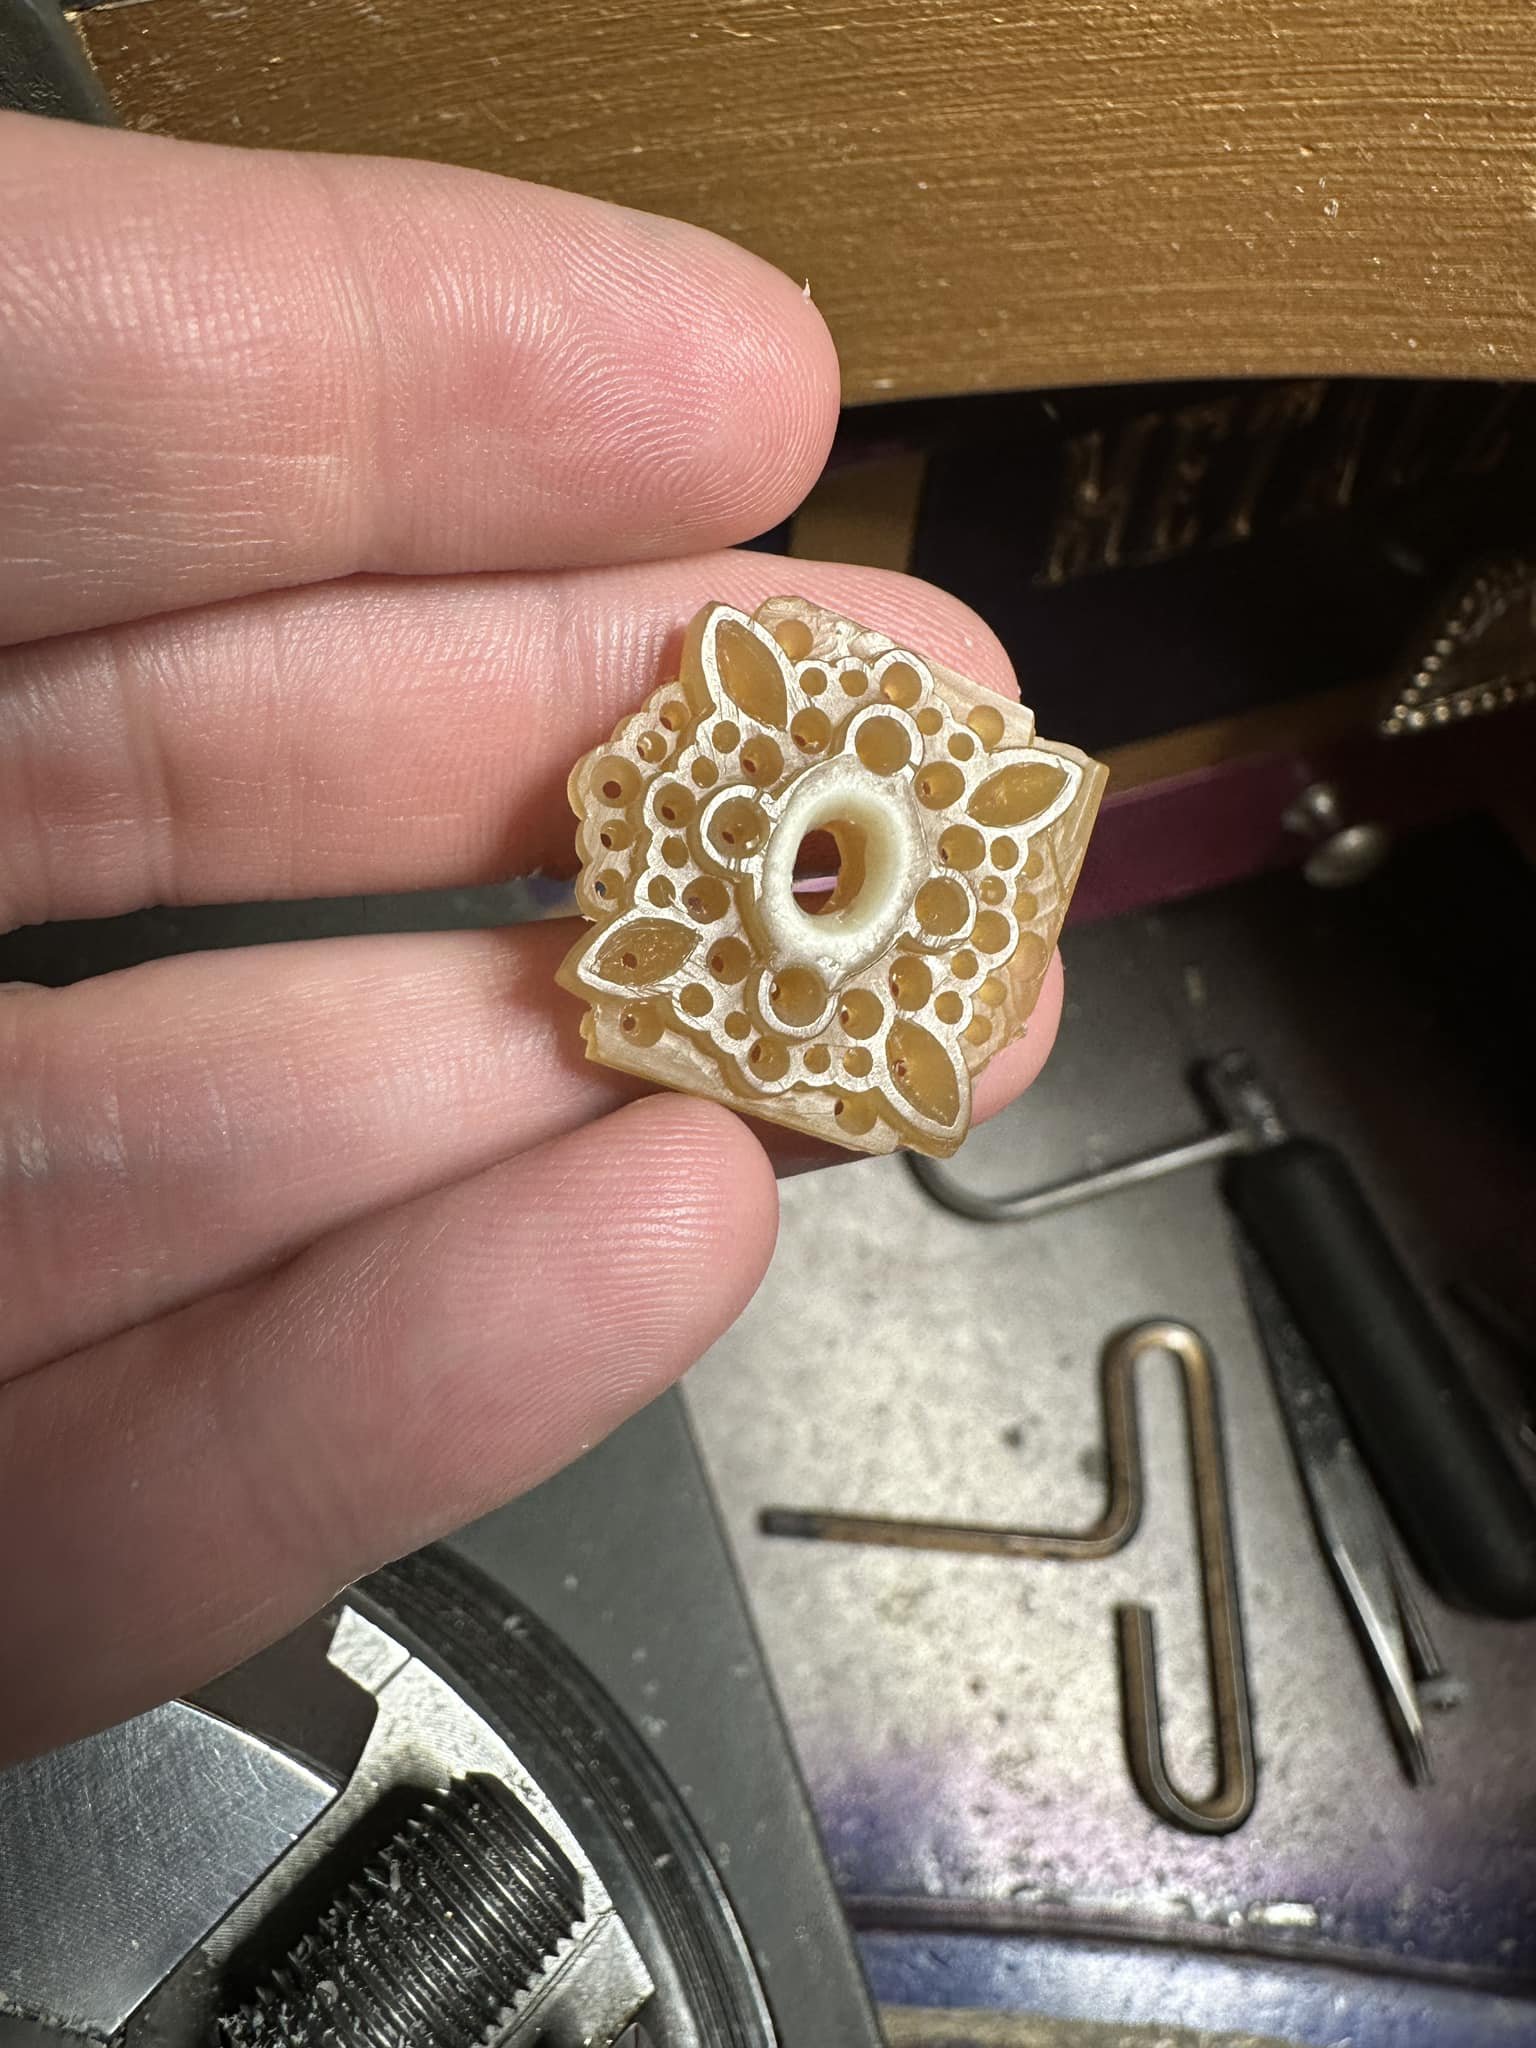 Almost done with this top plate for an epic ring I am making. Will be cast in 18k rose gold.